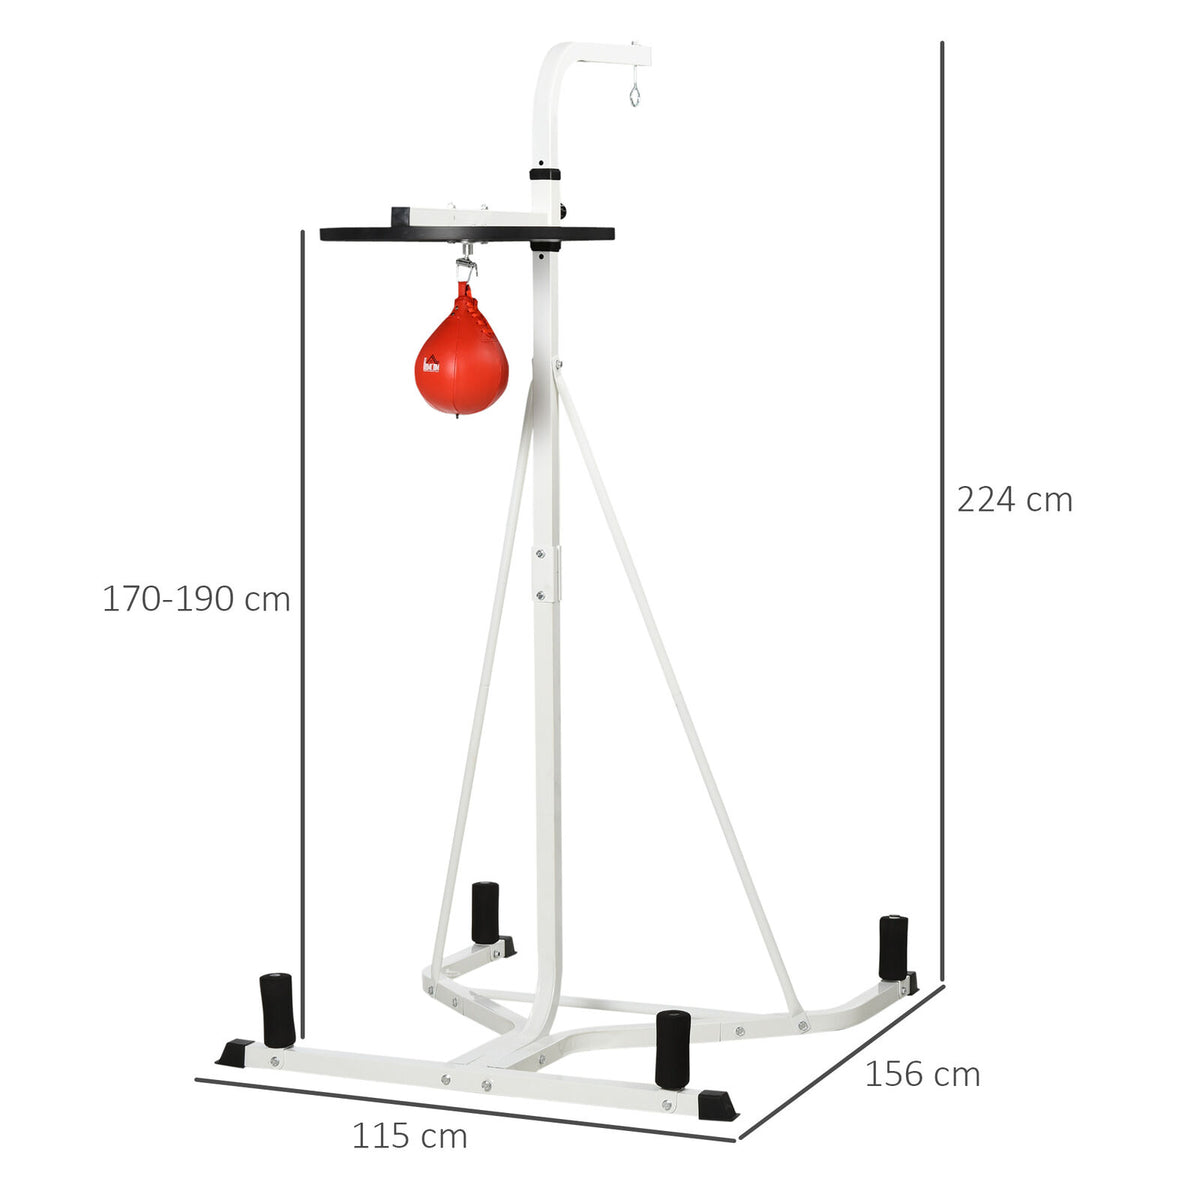 Boxing Punch Bag Stands